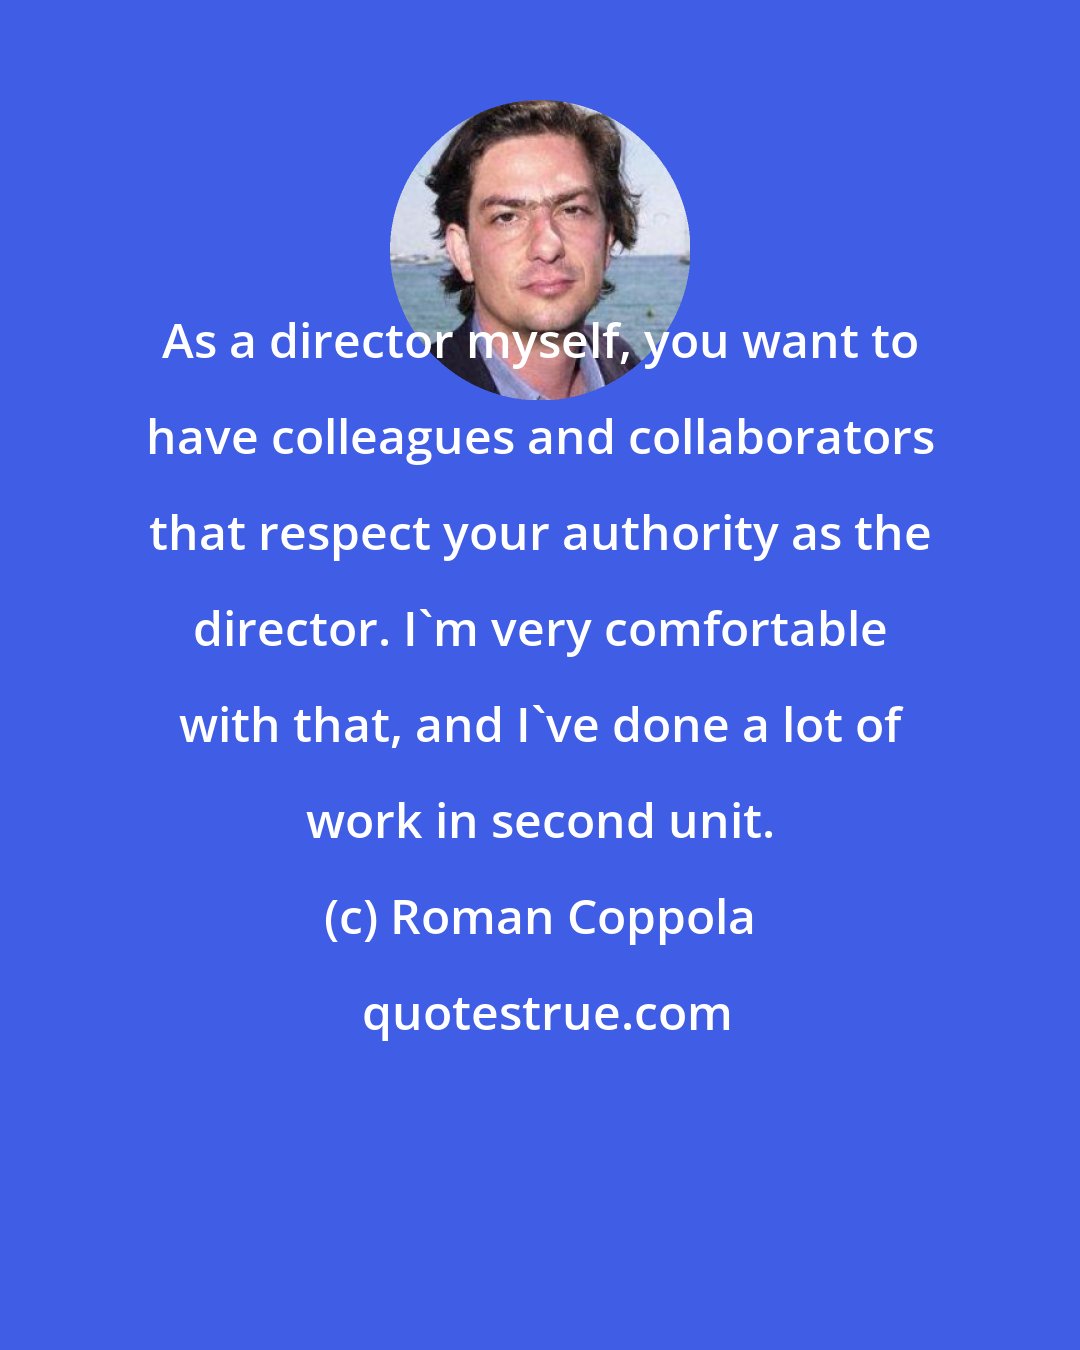 Roman Coppola: As a director myself, you want to have colleagues and collaborators that respect your authority as the director. I'm very comfortable with that, and I've done a lot of work in second unit.